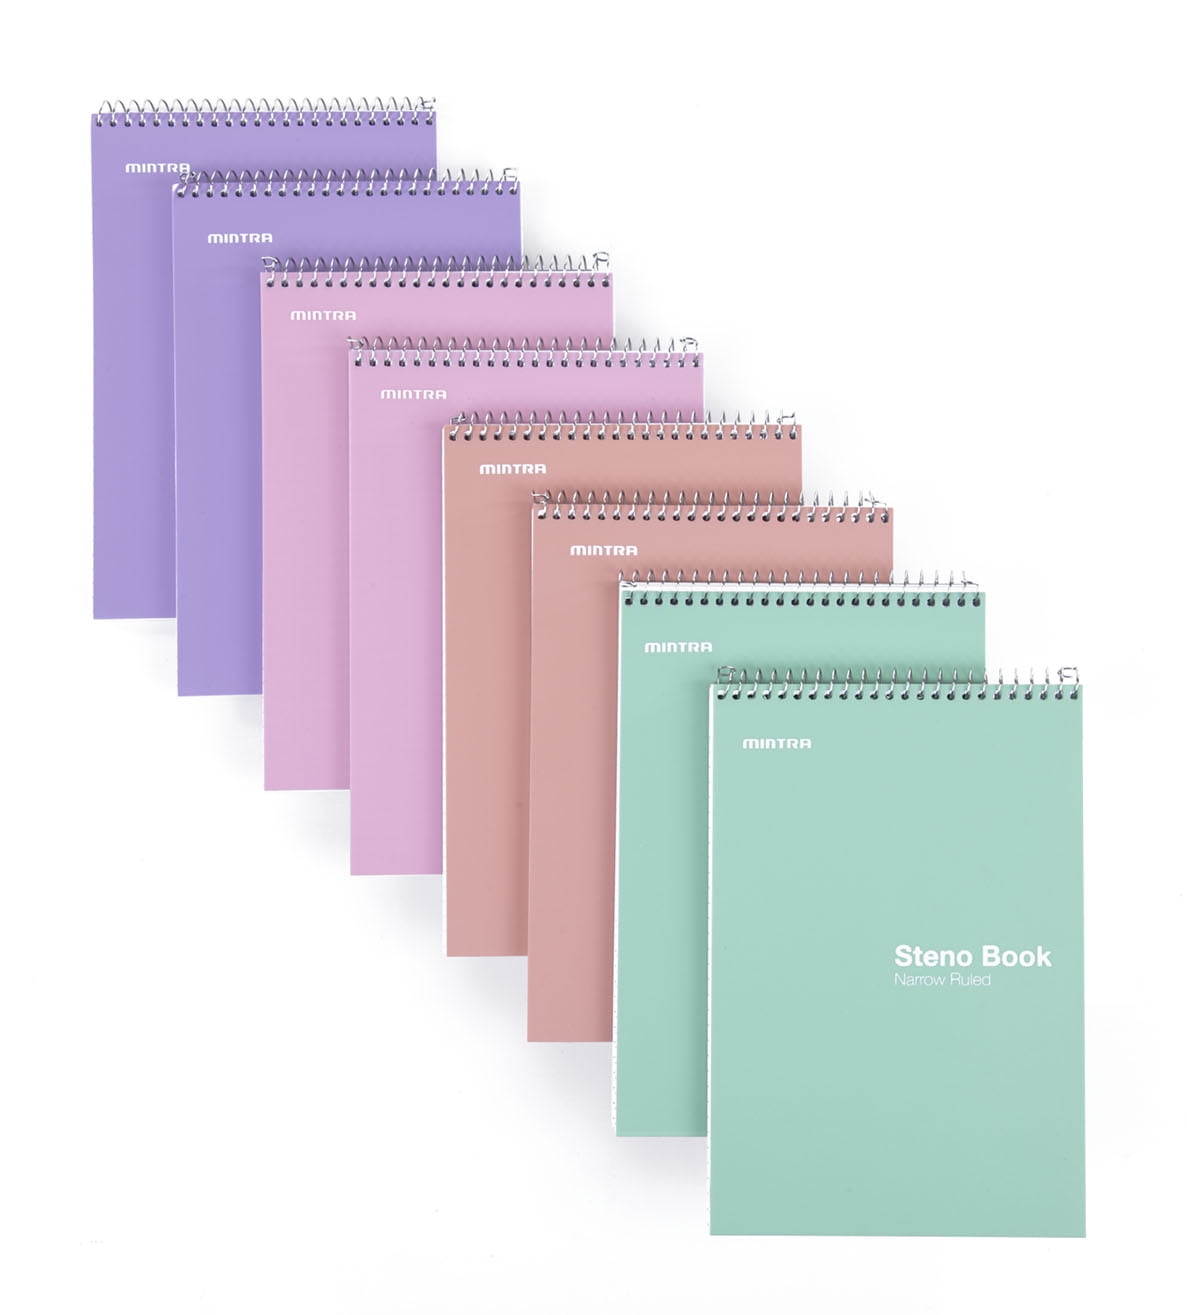 6x College Ruled Spiral Notebooks Note Book School Pastel High School Paper New 